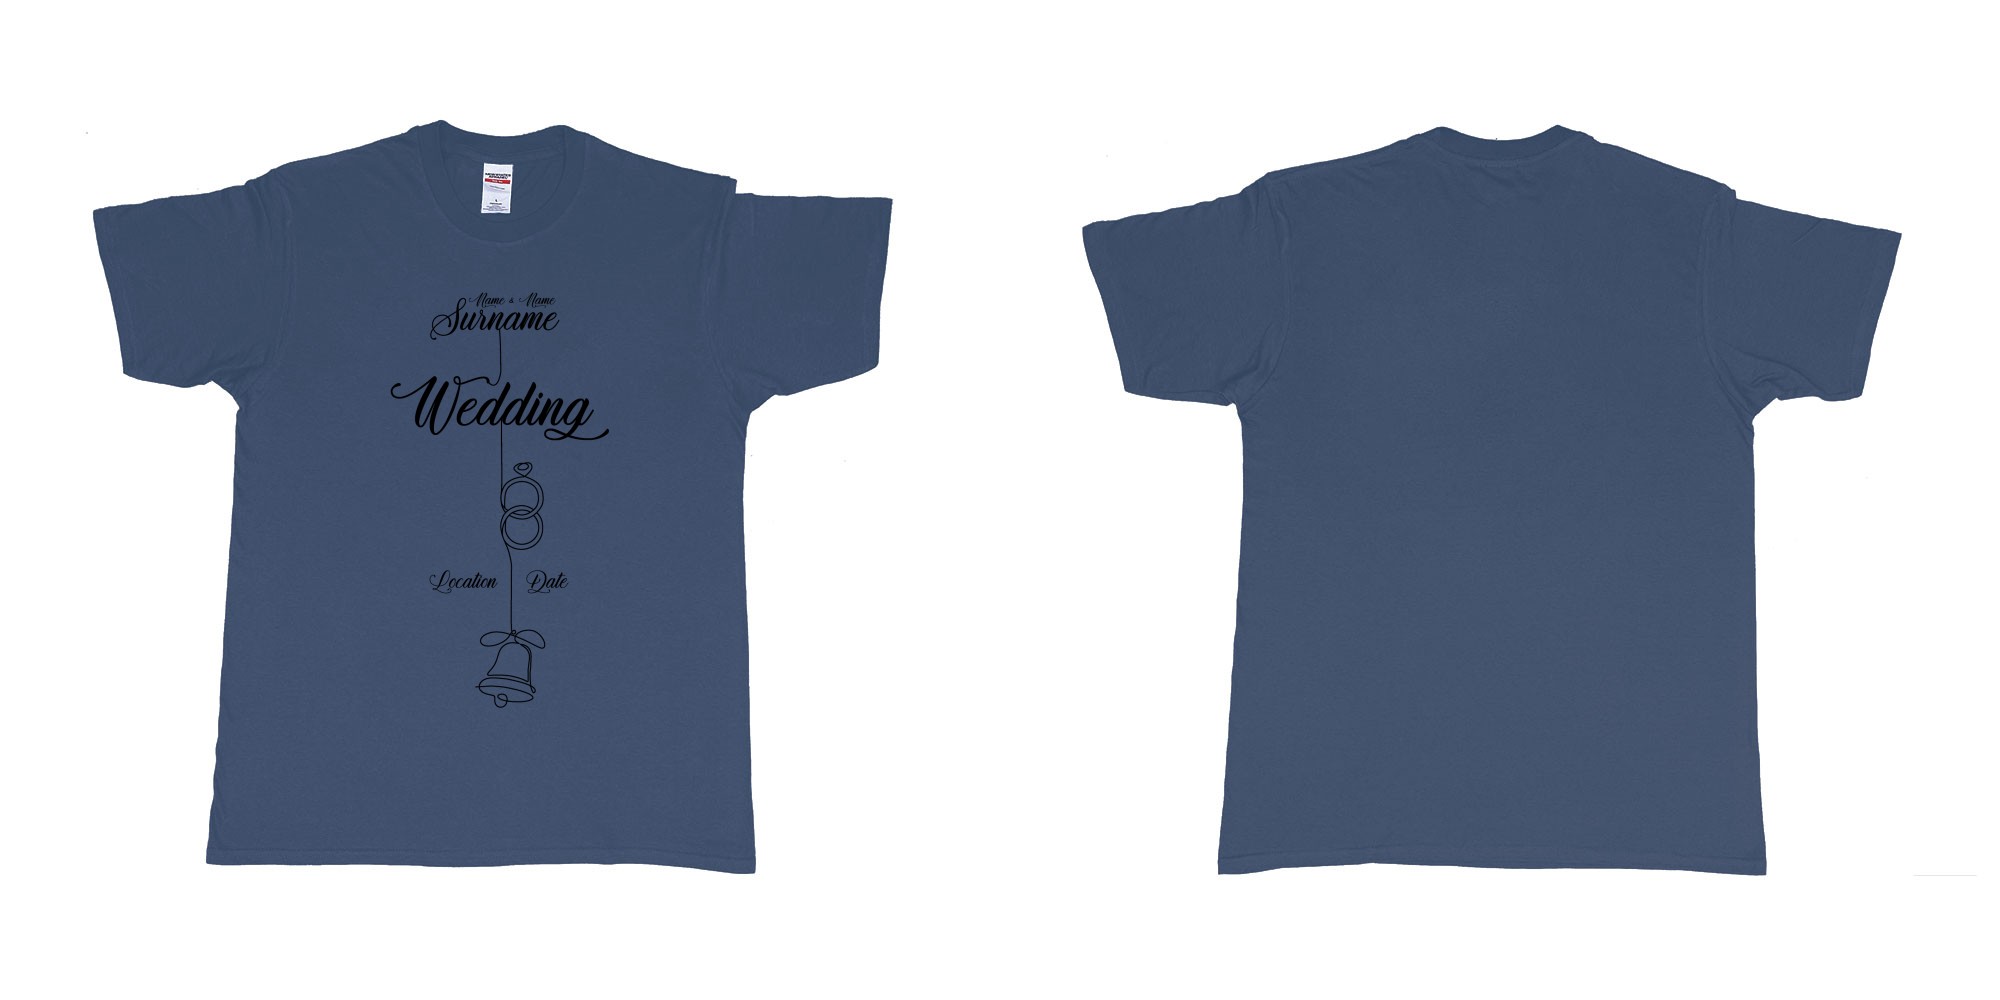 Custom tshirt design wedding string rings bell in fabric color navy choice your own text made in Bali by The Pirate Way